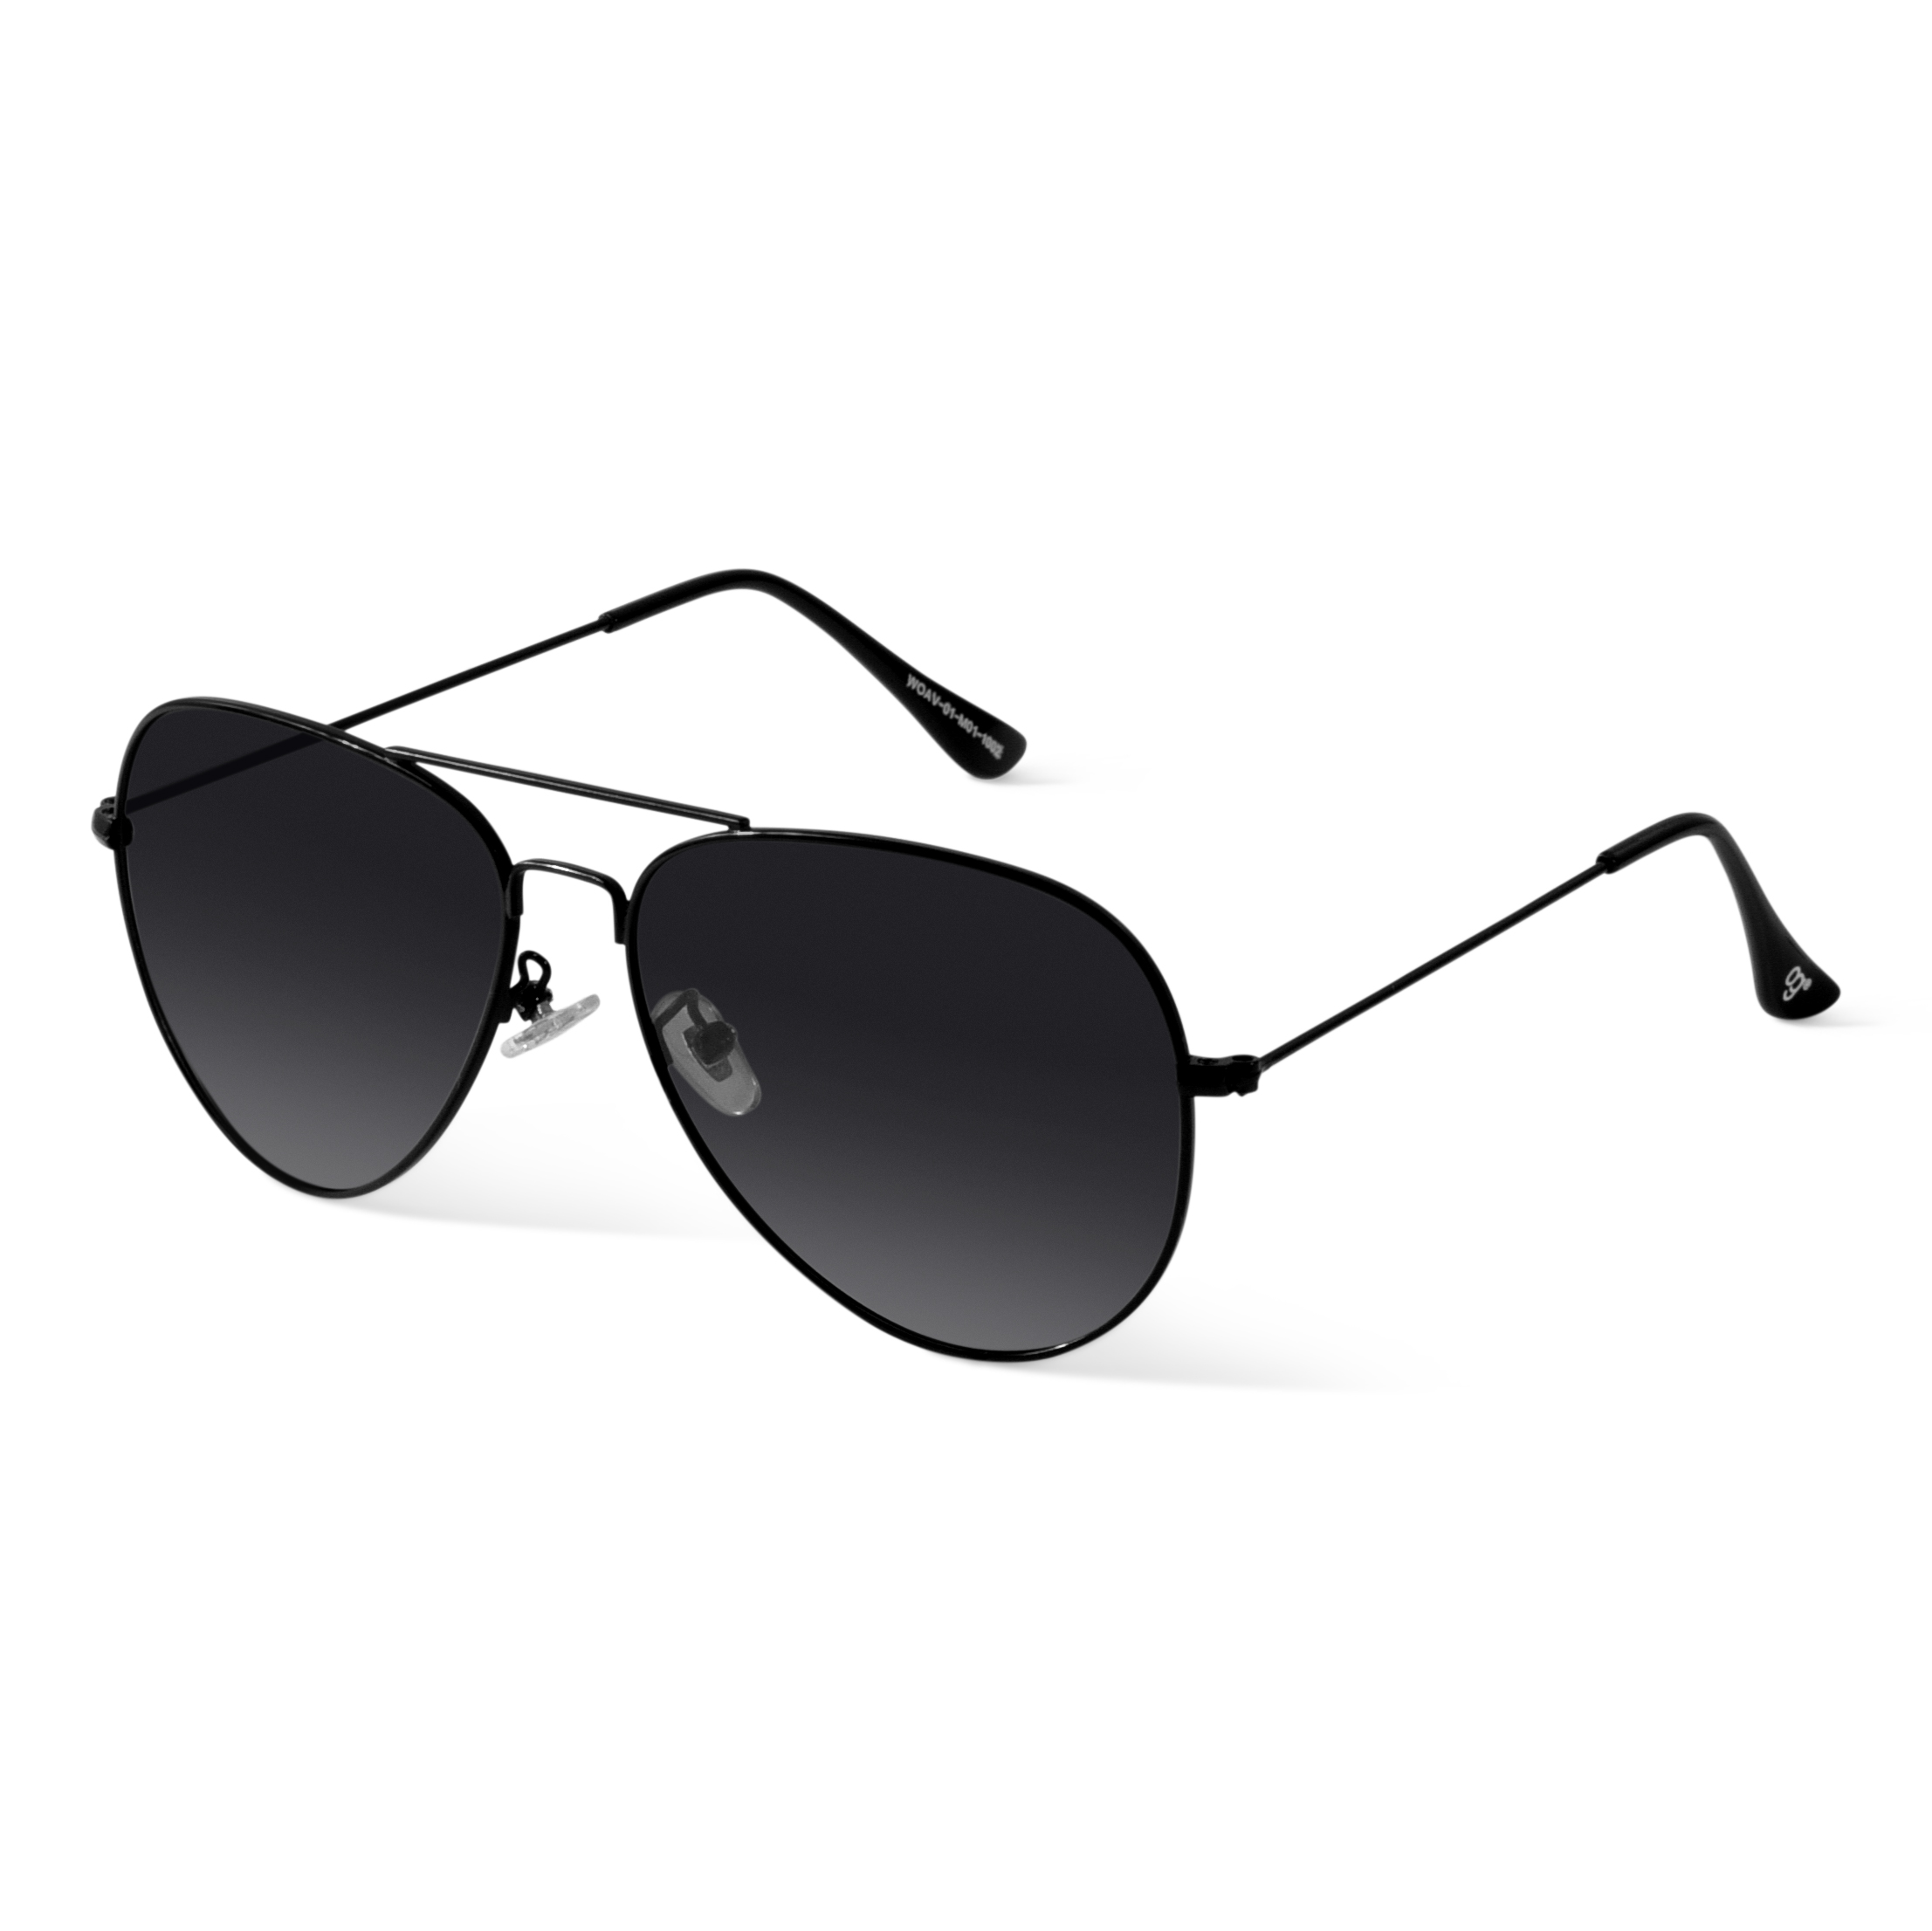 Aviator sunglasses in black and grey | GUCCI® US-tuongthan.vn